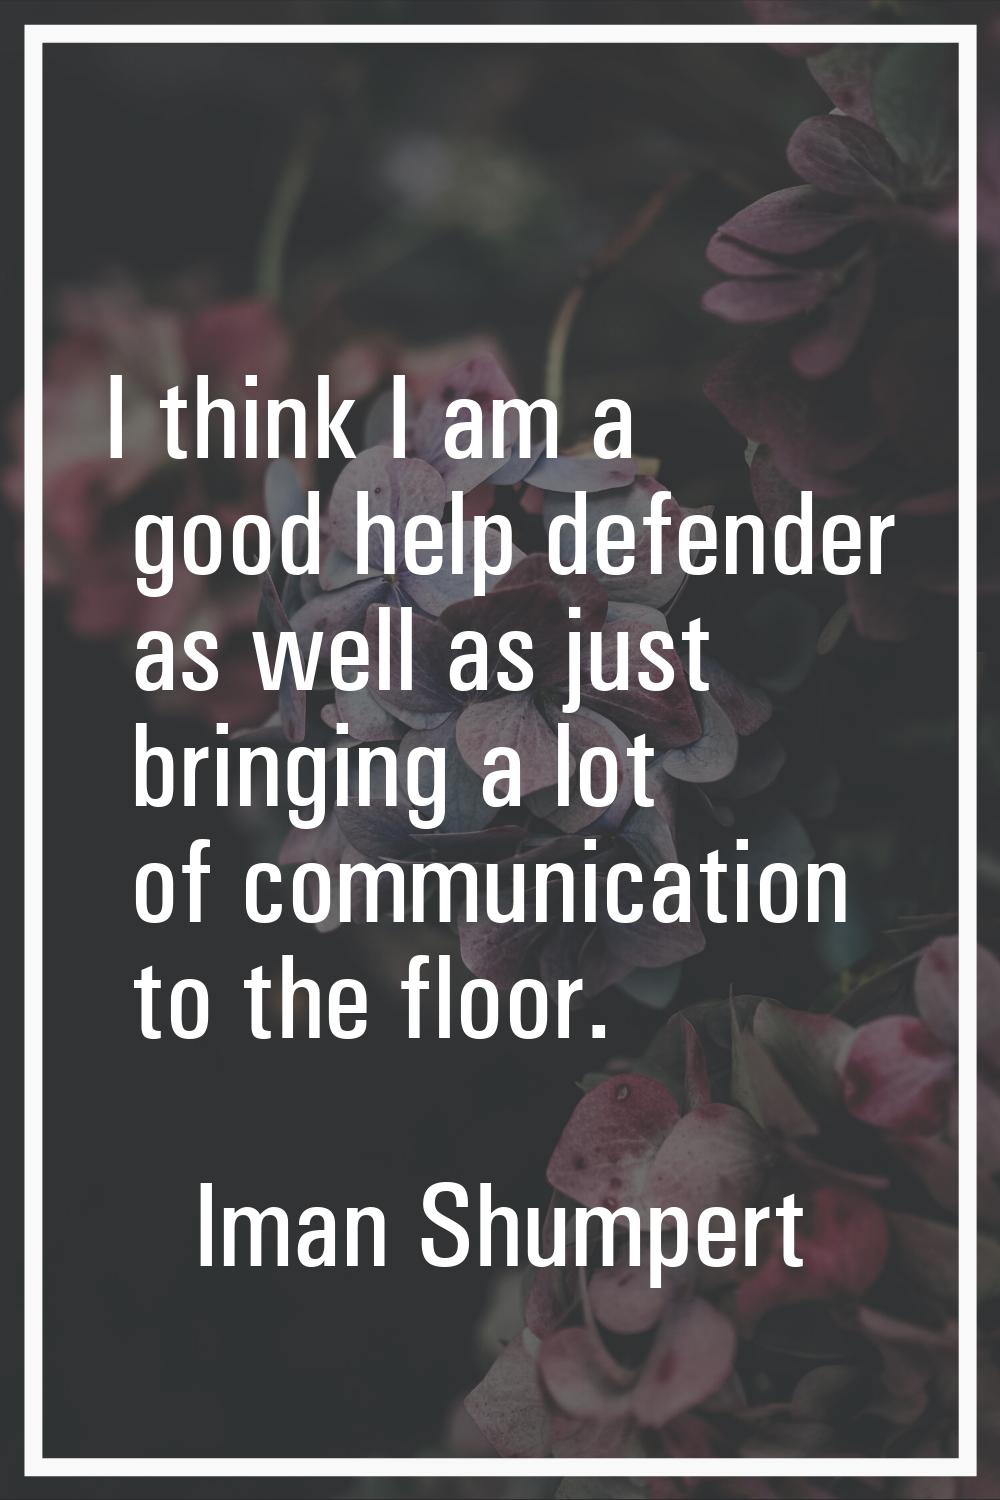 I think I am a good help defender as well as just bringing a lot of communication to the floor.